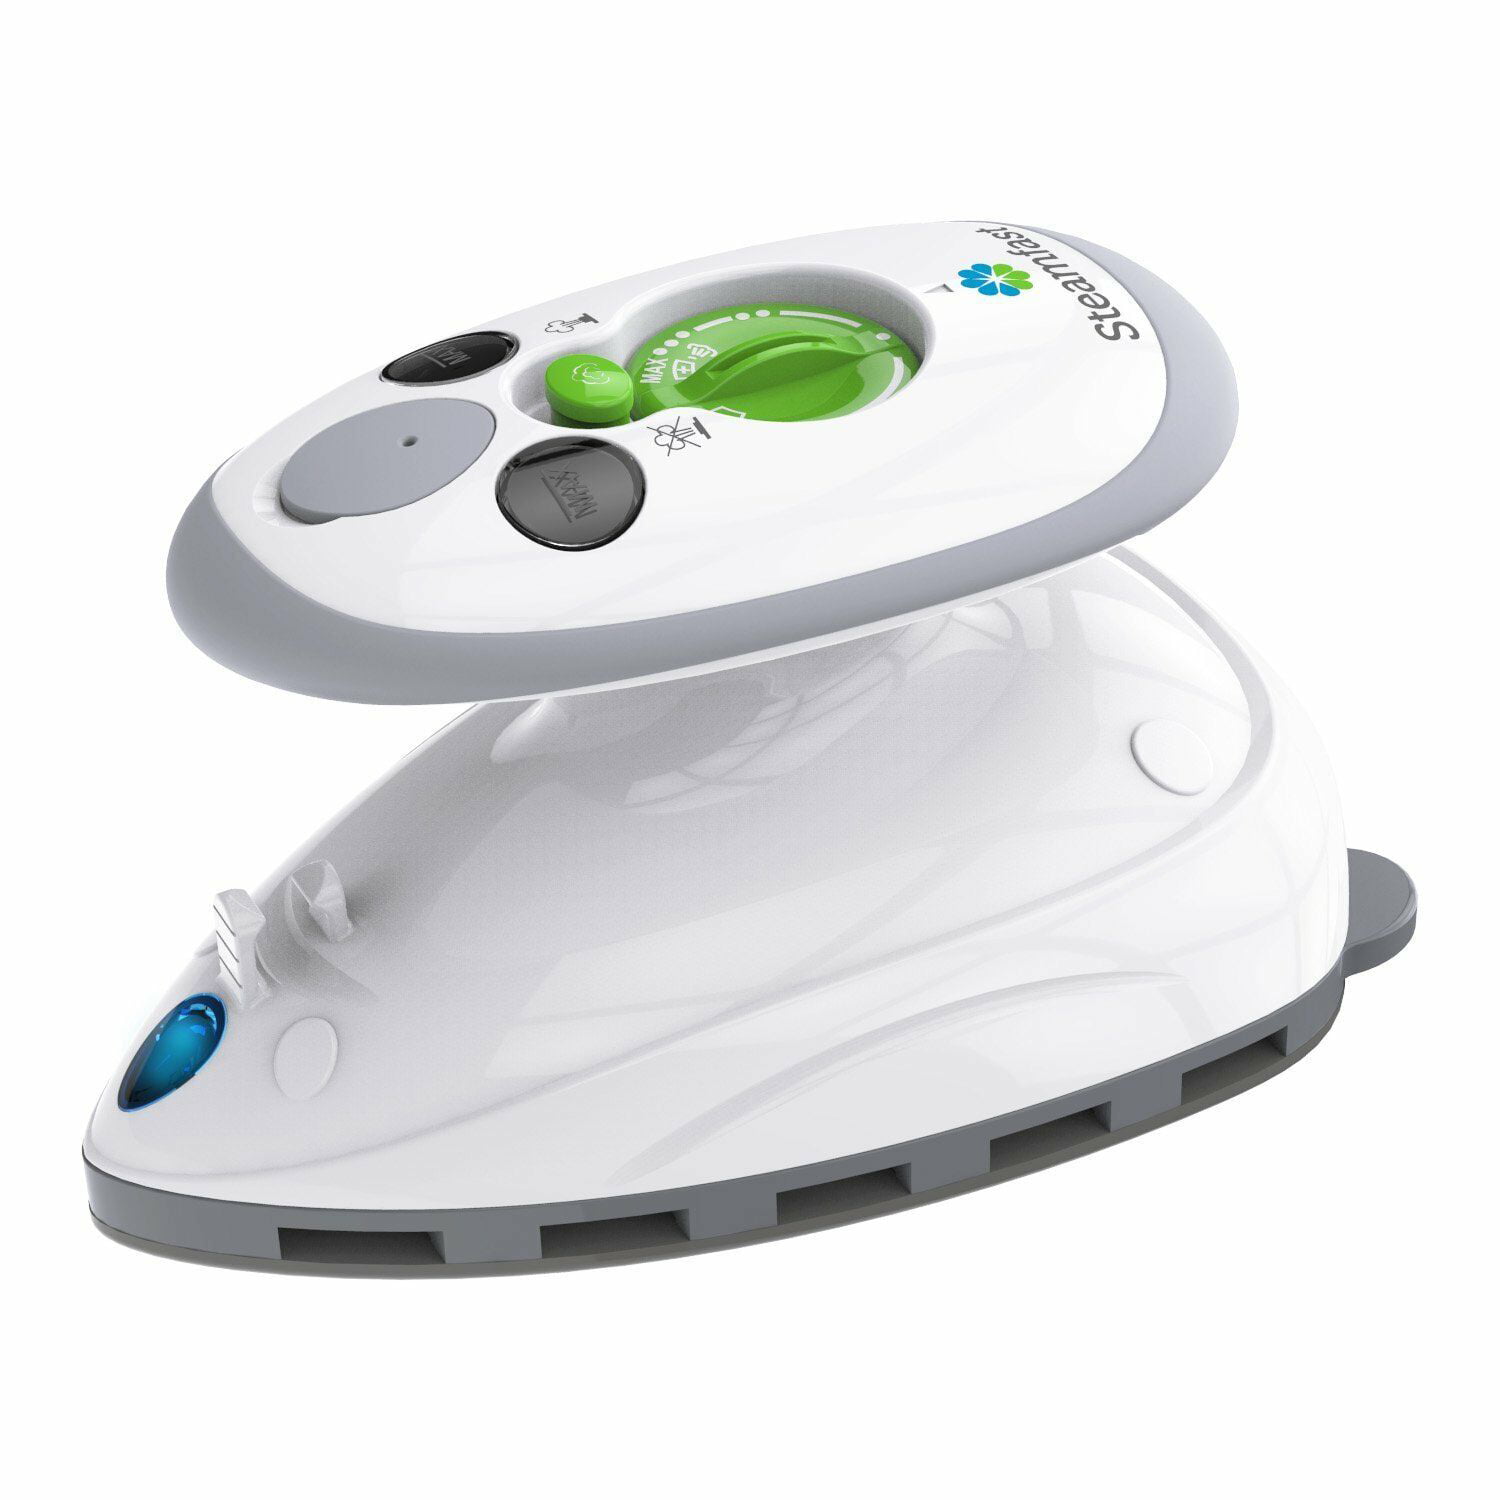 Steamfast Dual Voltage Portable Travel Steam Iron with Travel Bag 